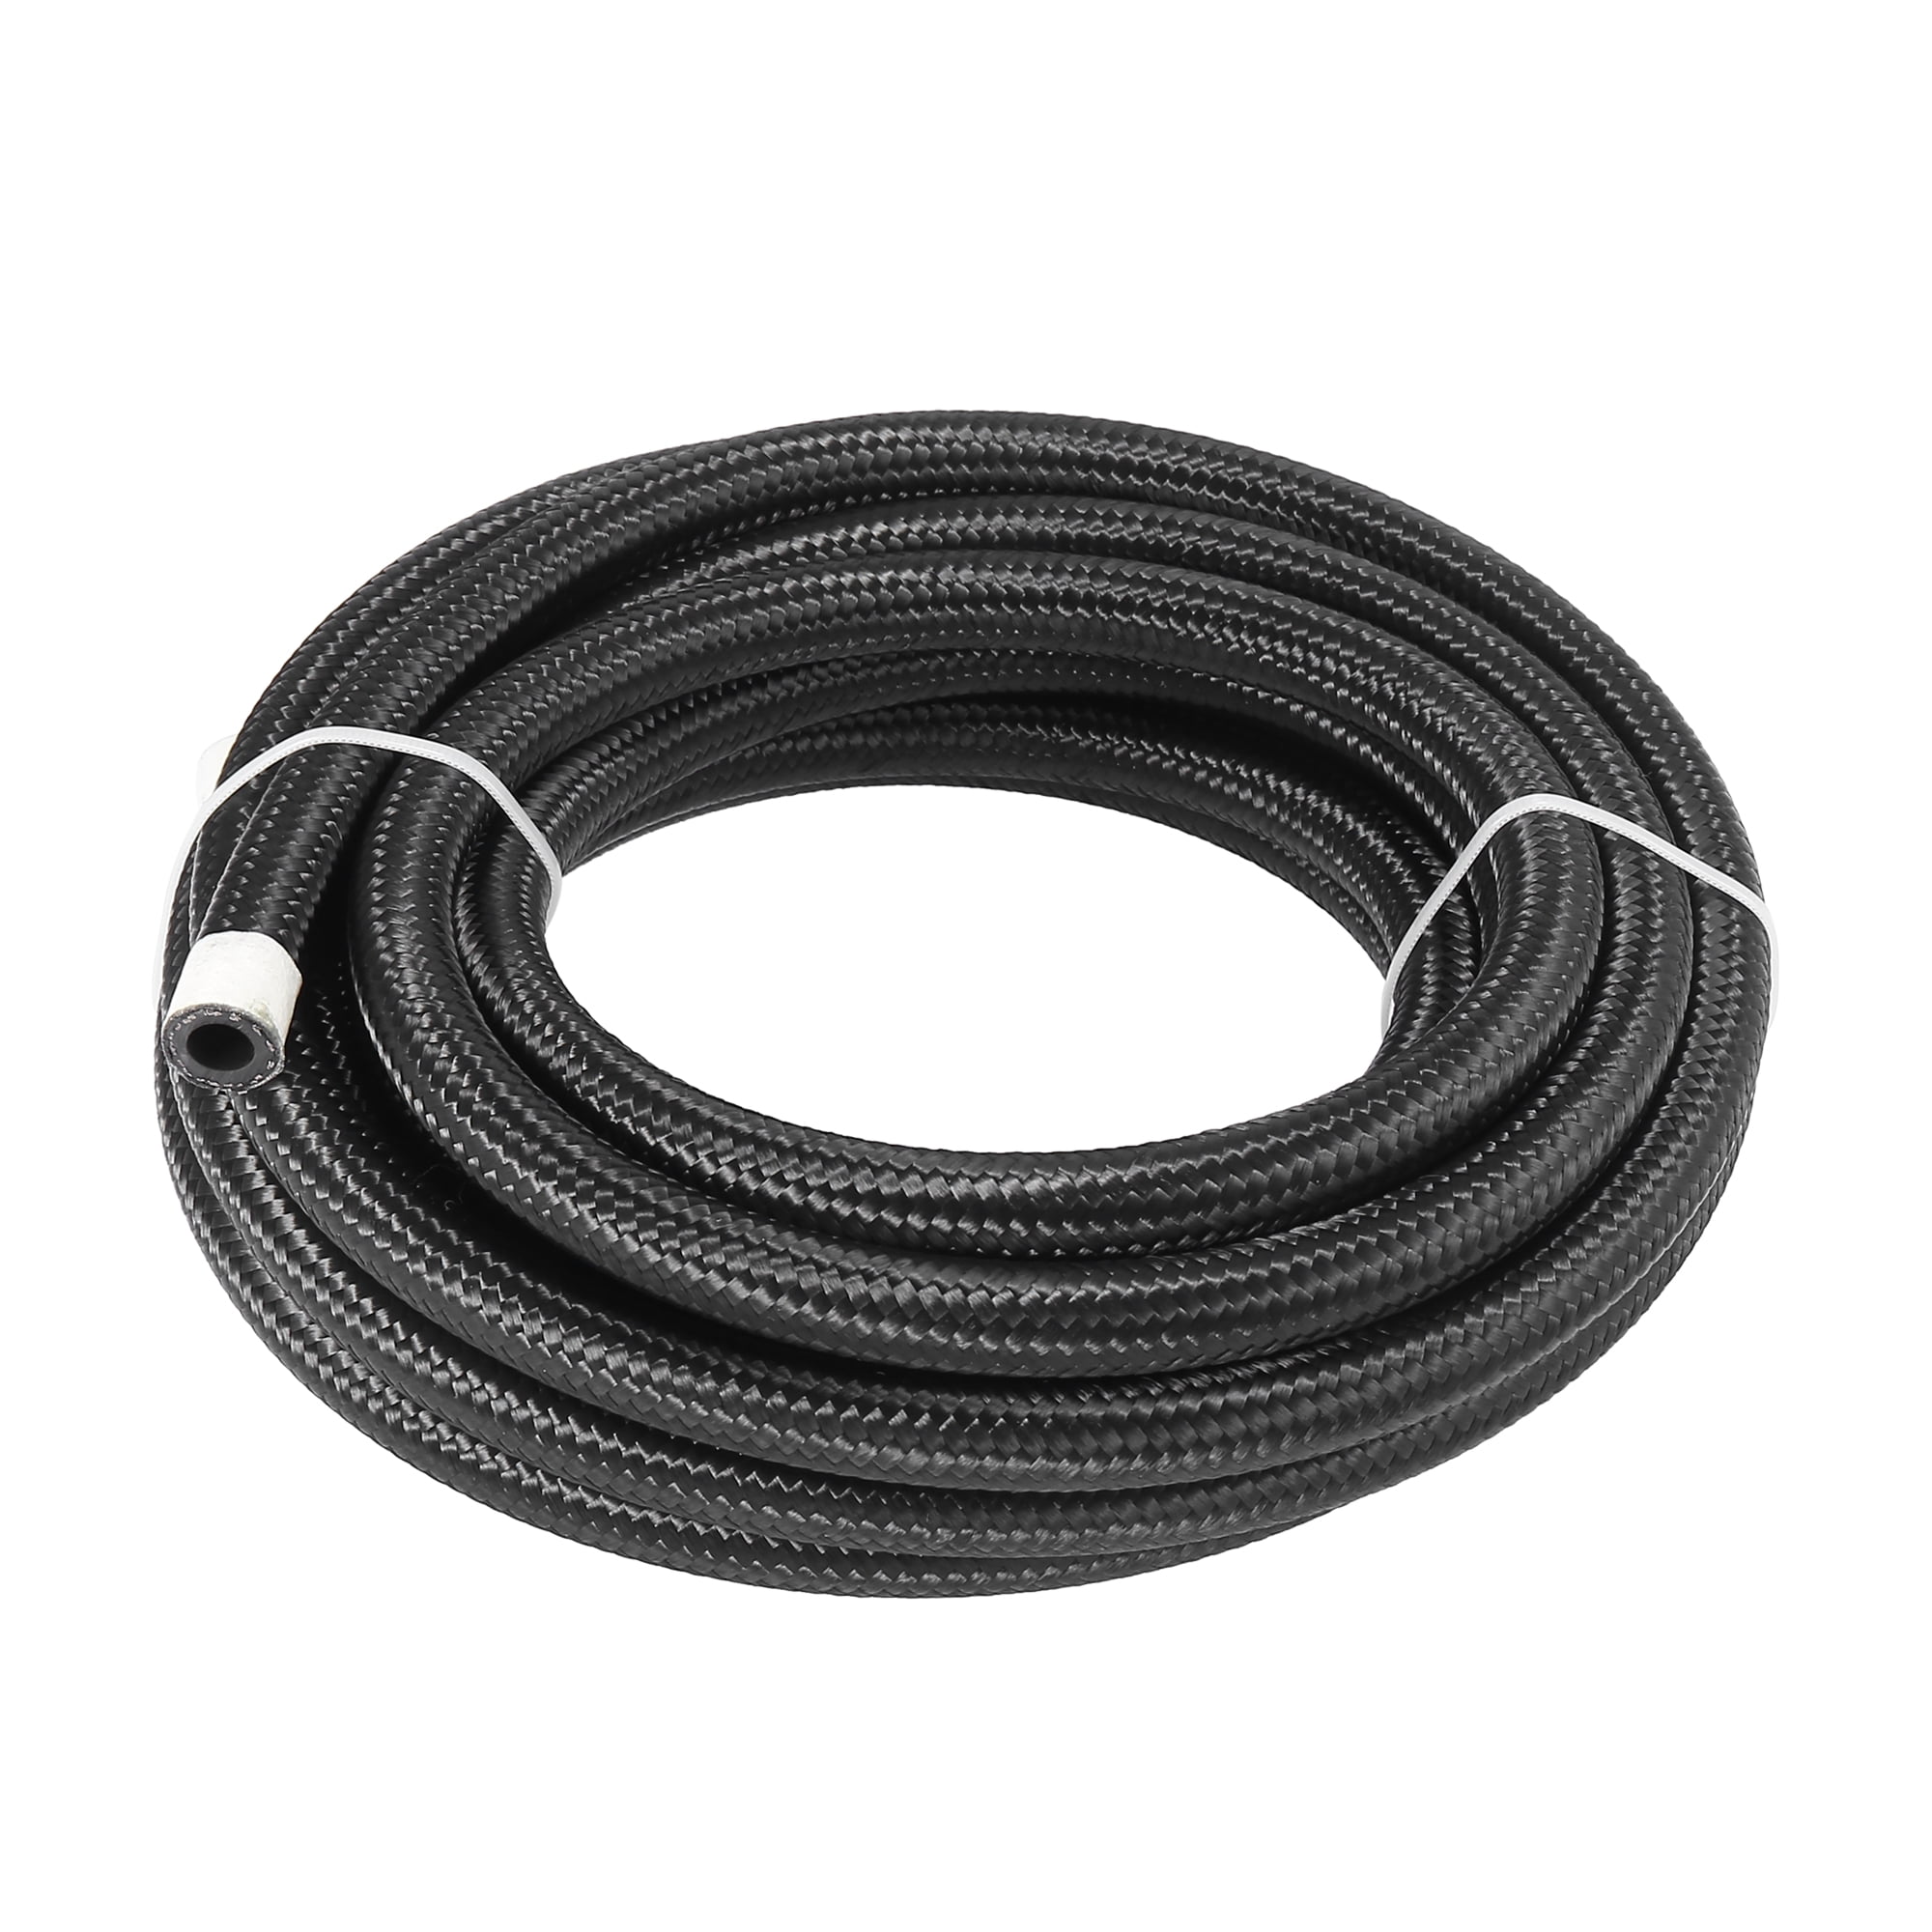 NEW QUALITY AN6 STAINLESS STEEL BRAIDED FUEL HOSE LINE OIL PETROL AN-6 